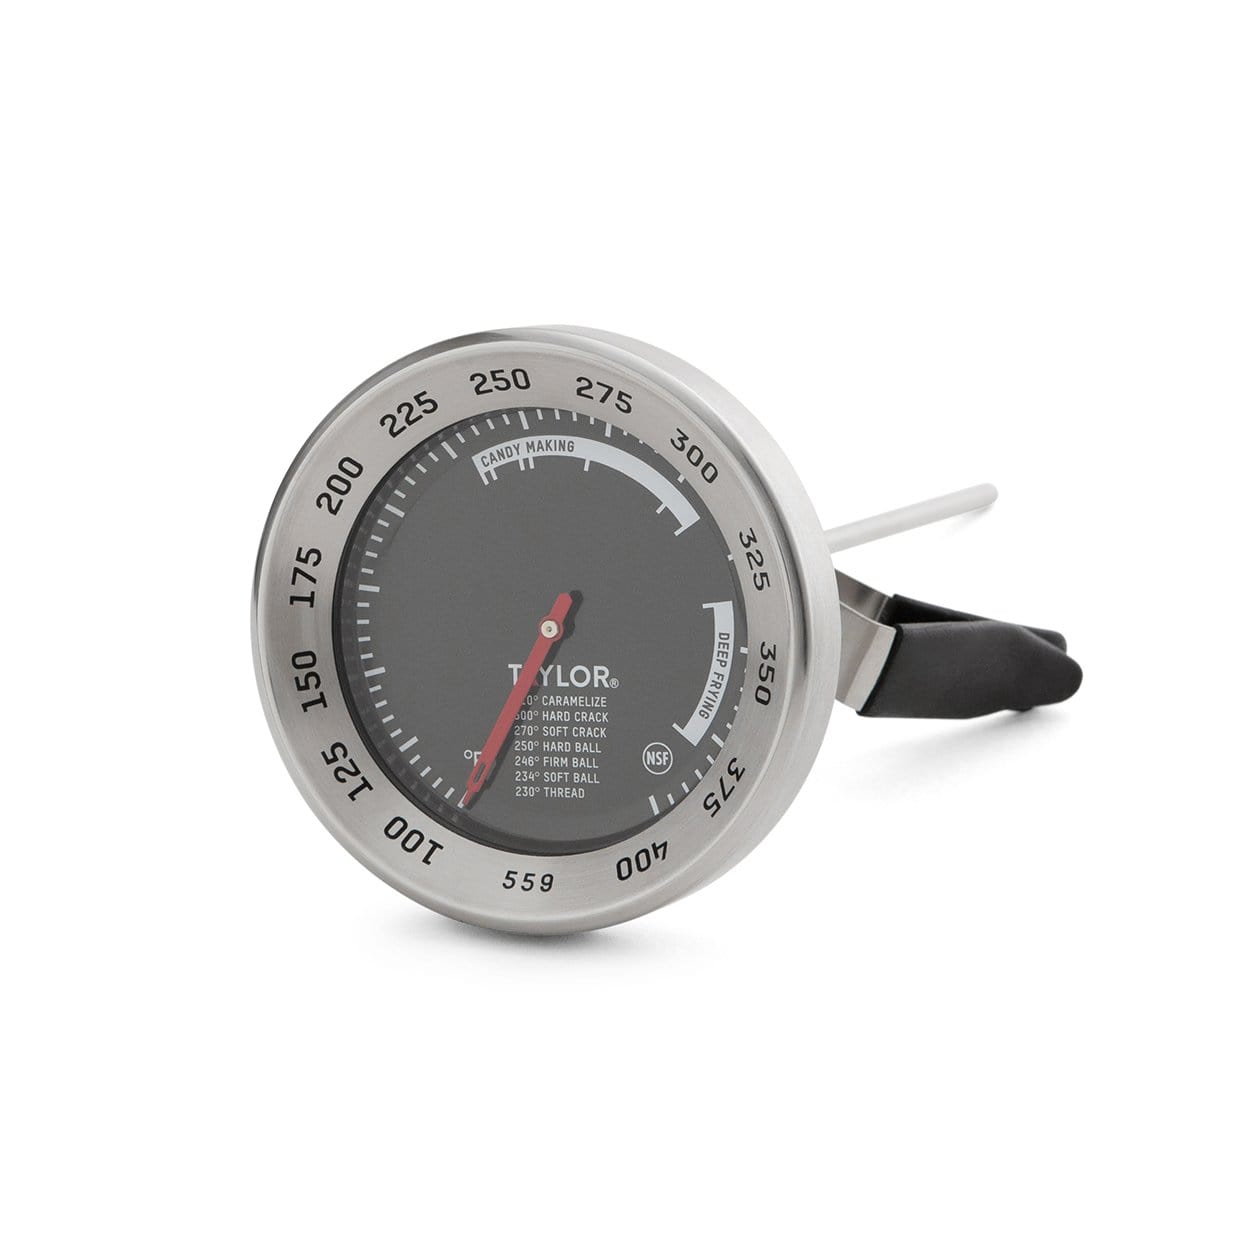 Taylor Candy and Deep Fry Thermometer 5911N – Good's Store Online